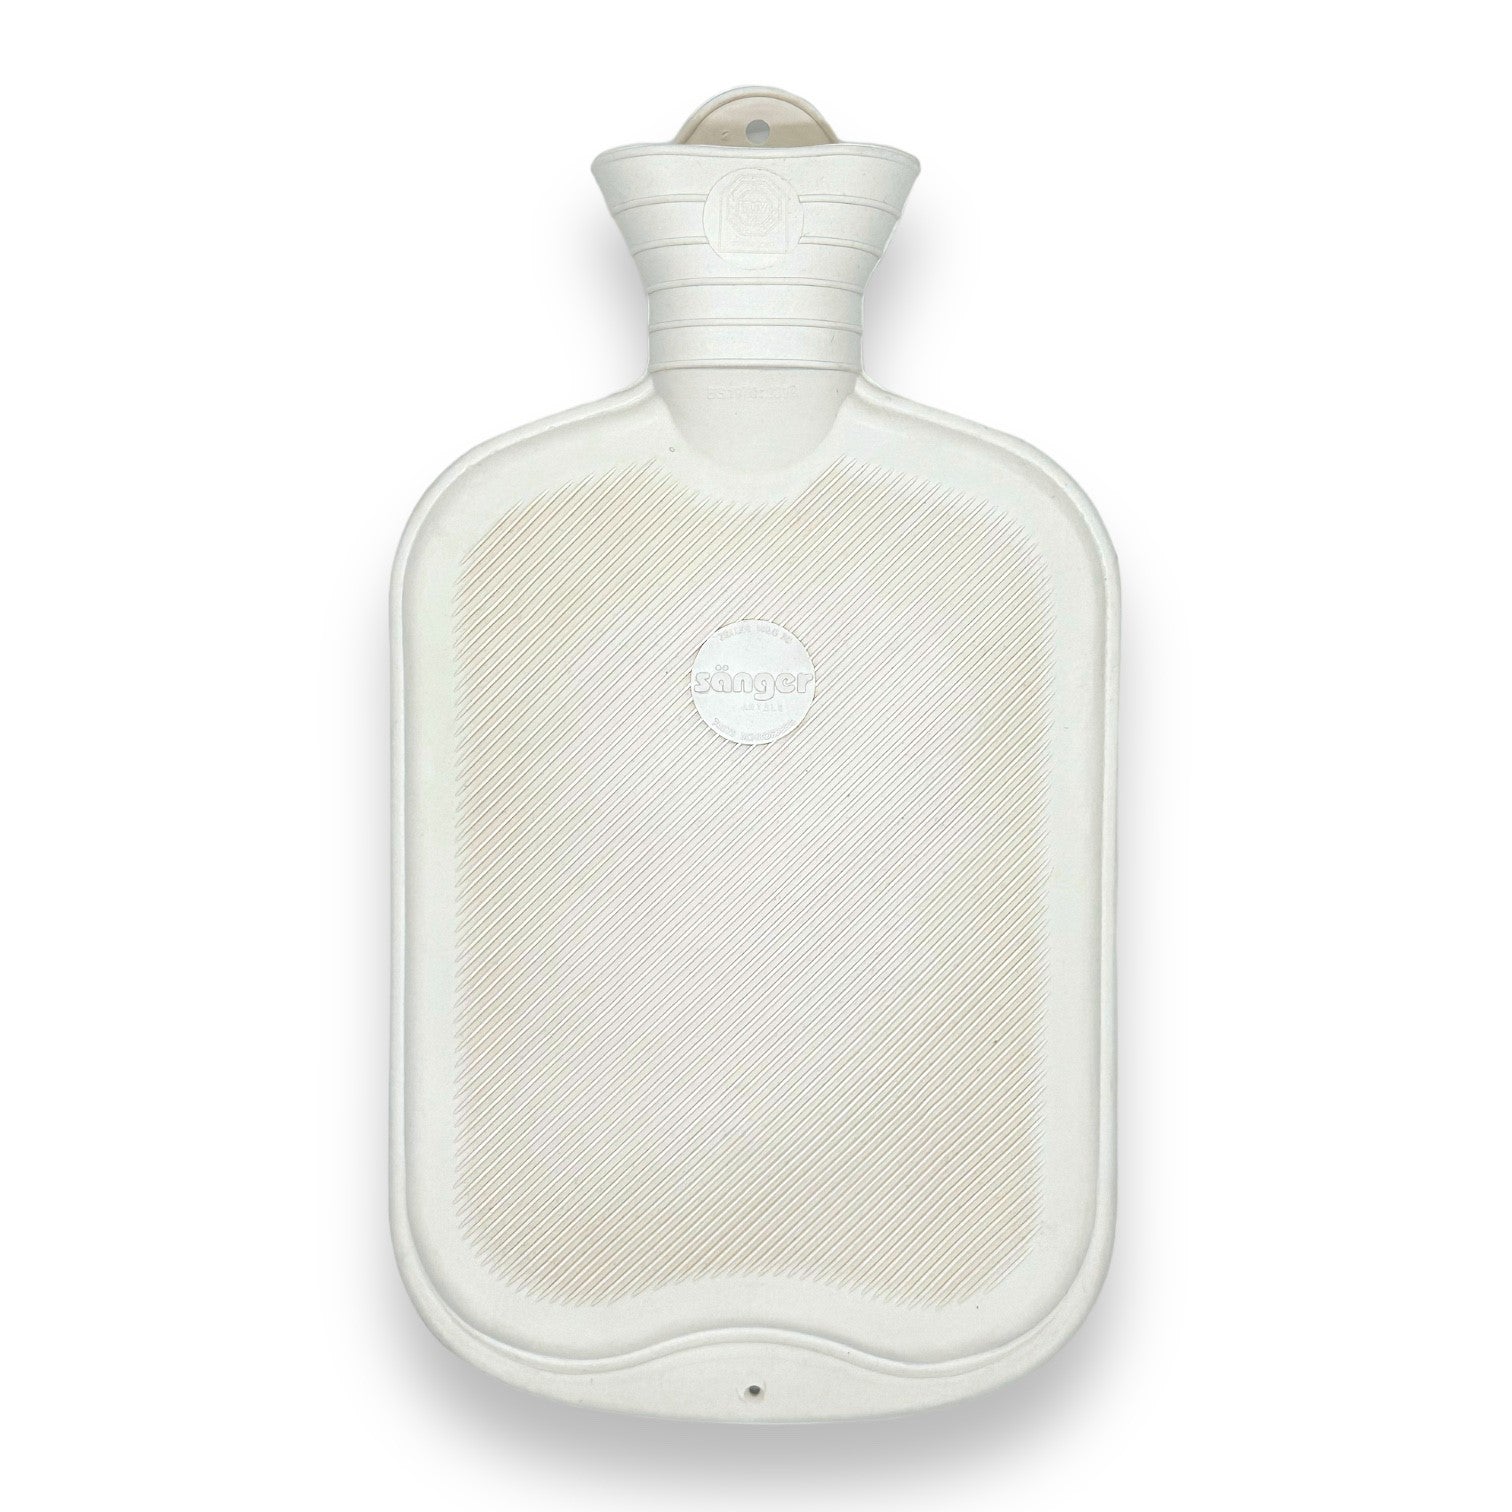 Sänger Rubber Hot Water Bottle Made in Germany 2 Litres white 